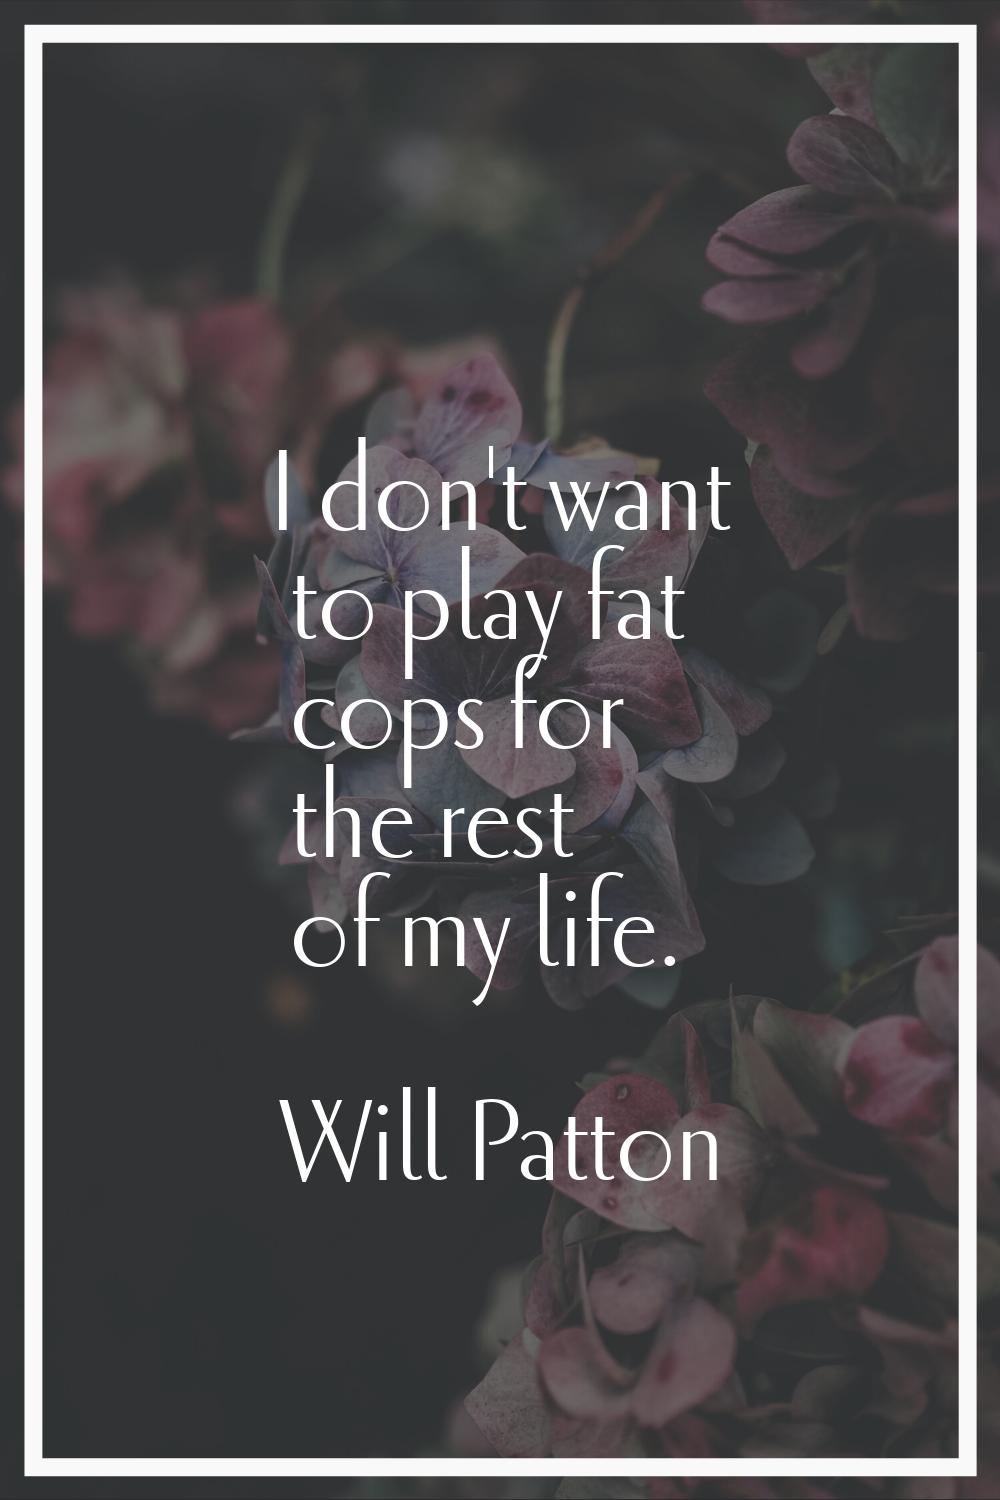 I don't want to play fat cops for the rest of my life.